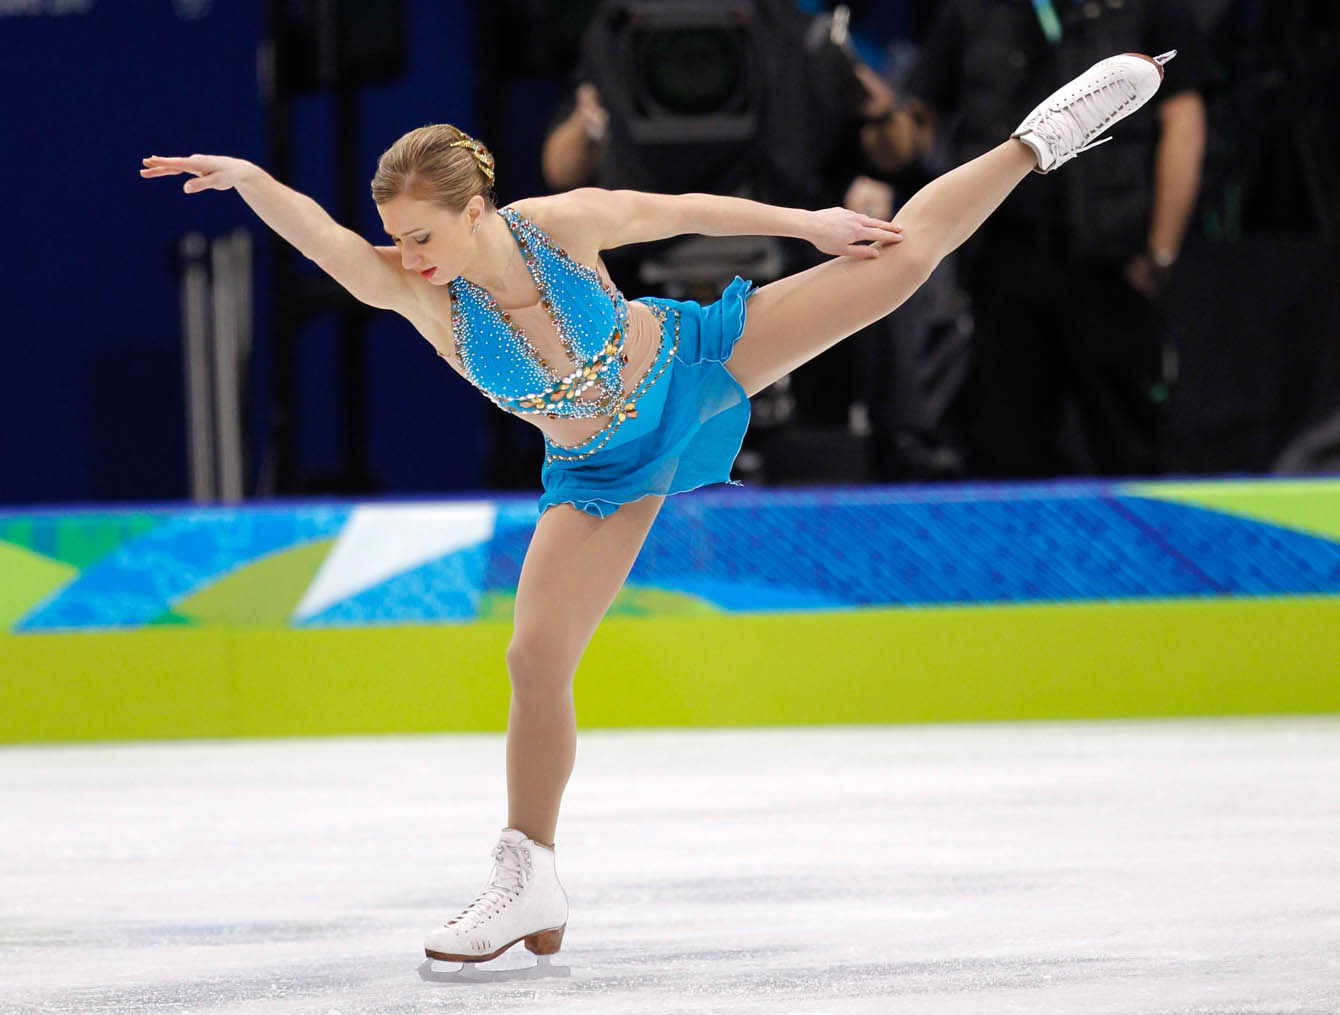 Joannie Rochette skates at the Vancouver 2010 Games